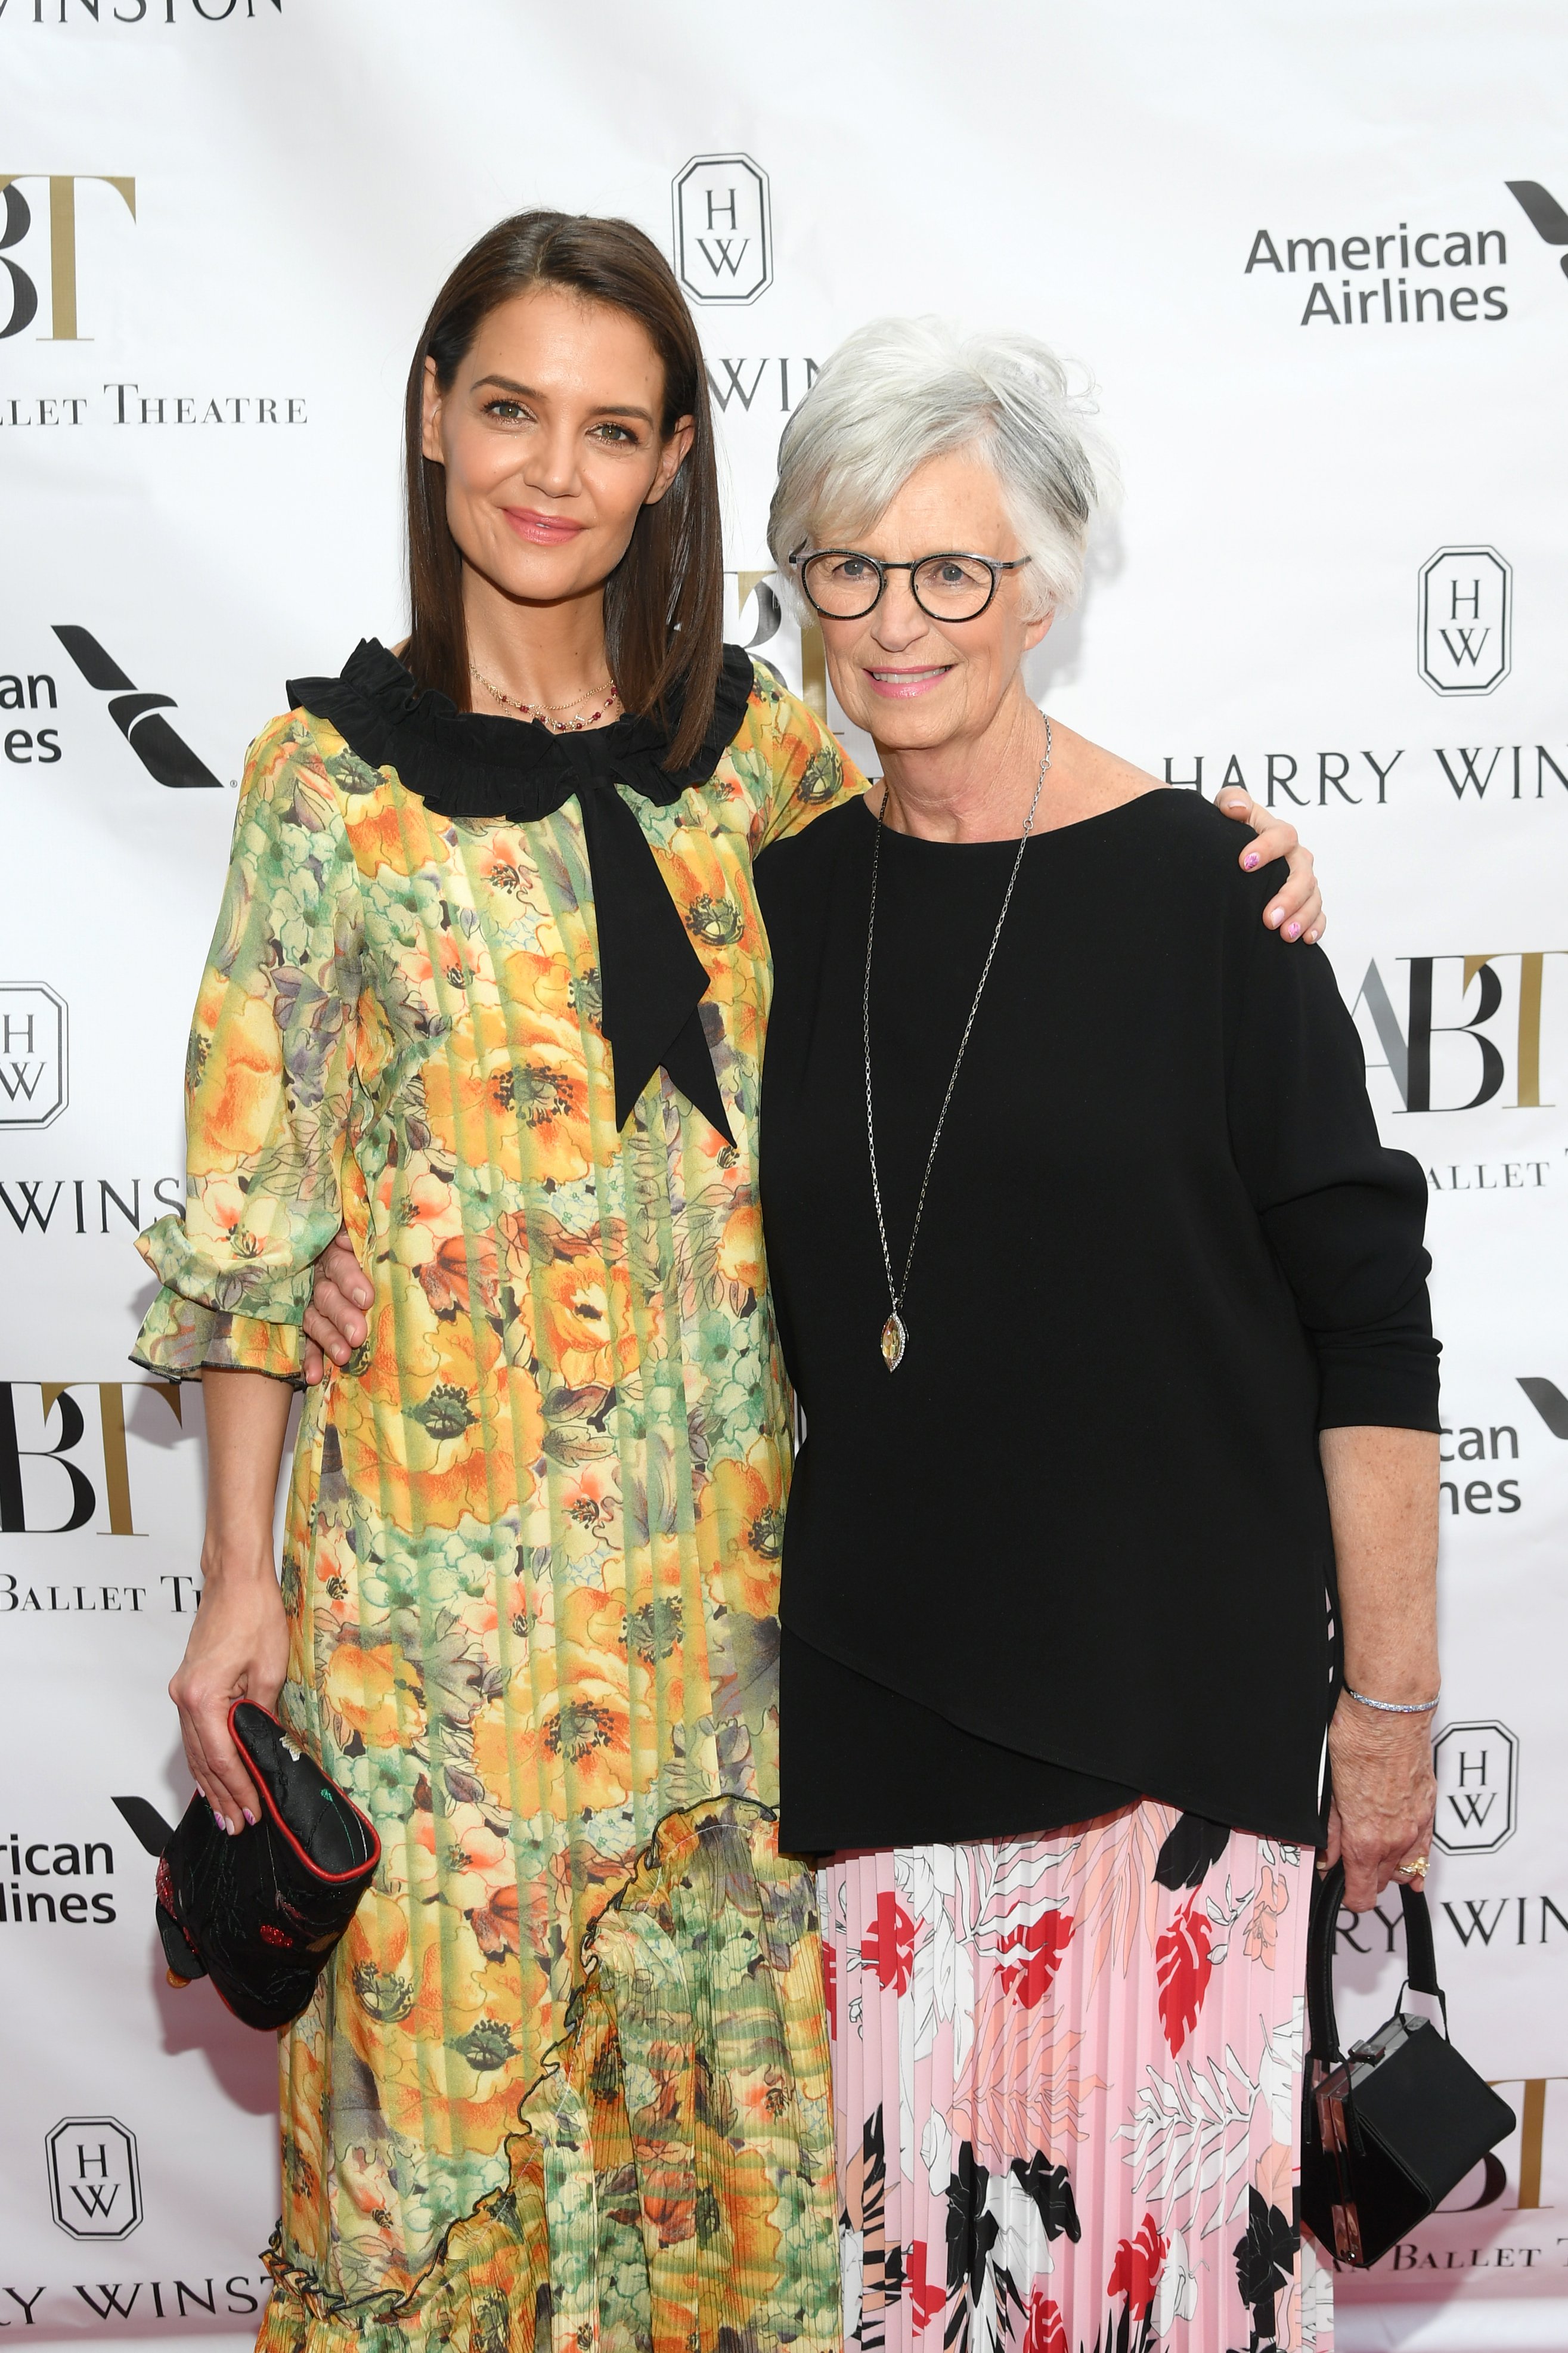 Actress Katie Holmes and hher mother Kathleen Stothers-Holmes at The Metropolitan Opera House on May 20 2019 | Source: Getty Images